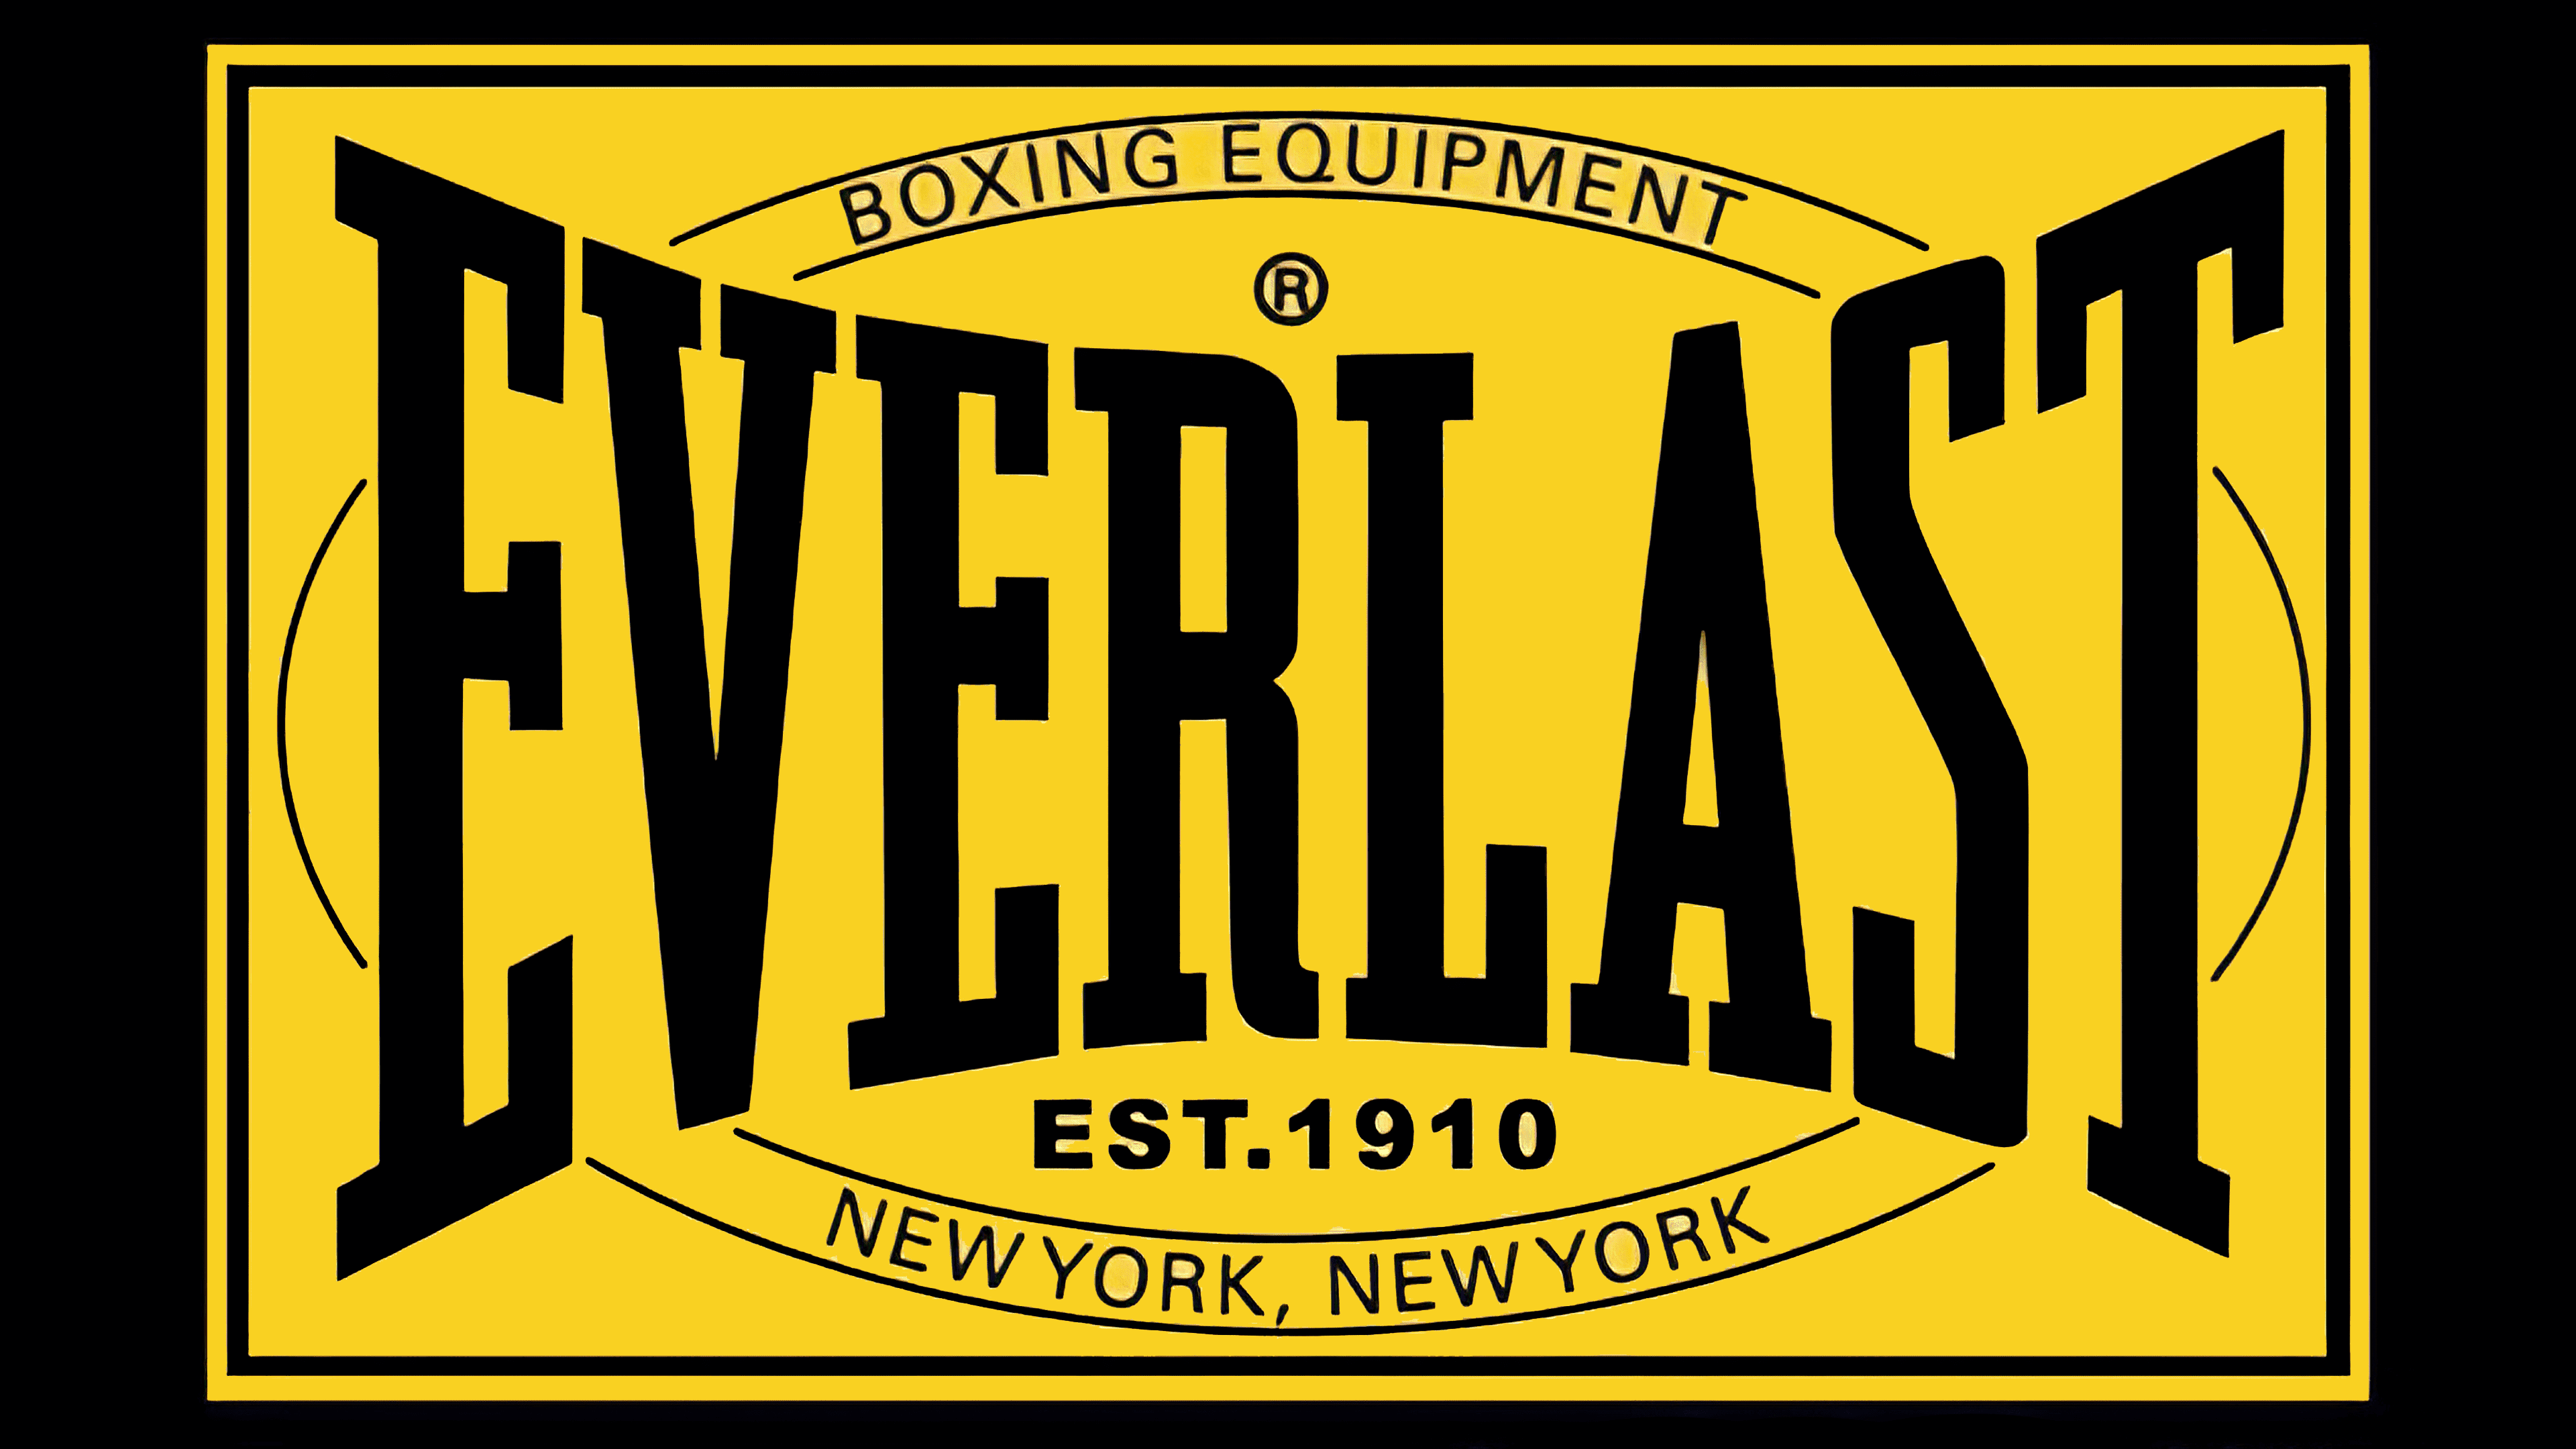 Everlast PIVT Boxing Boots, choose from Black/Gold or Black/Red